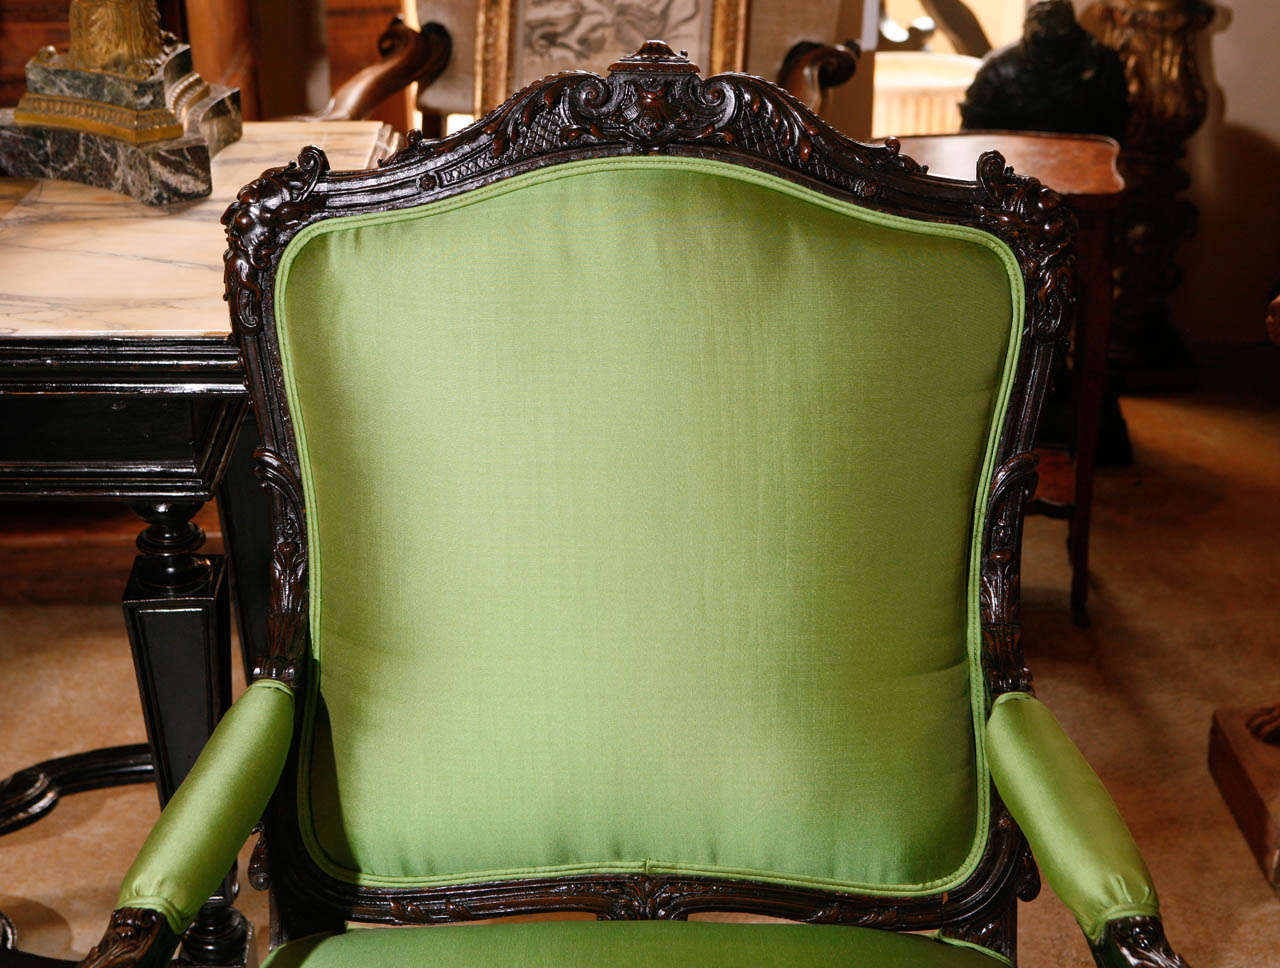 italian chairs for sale